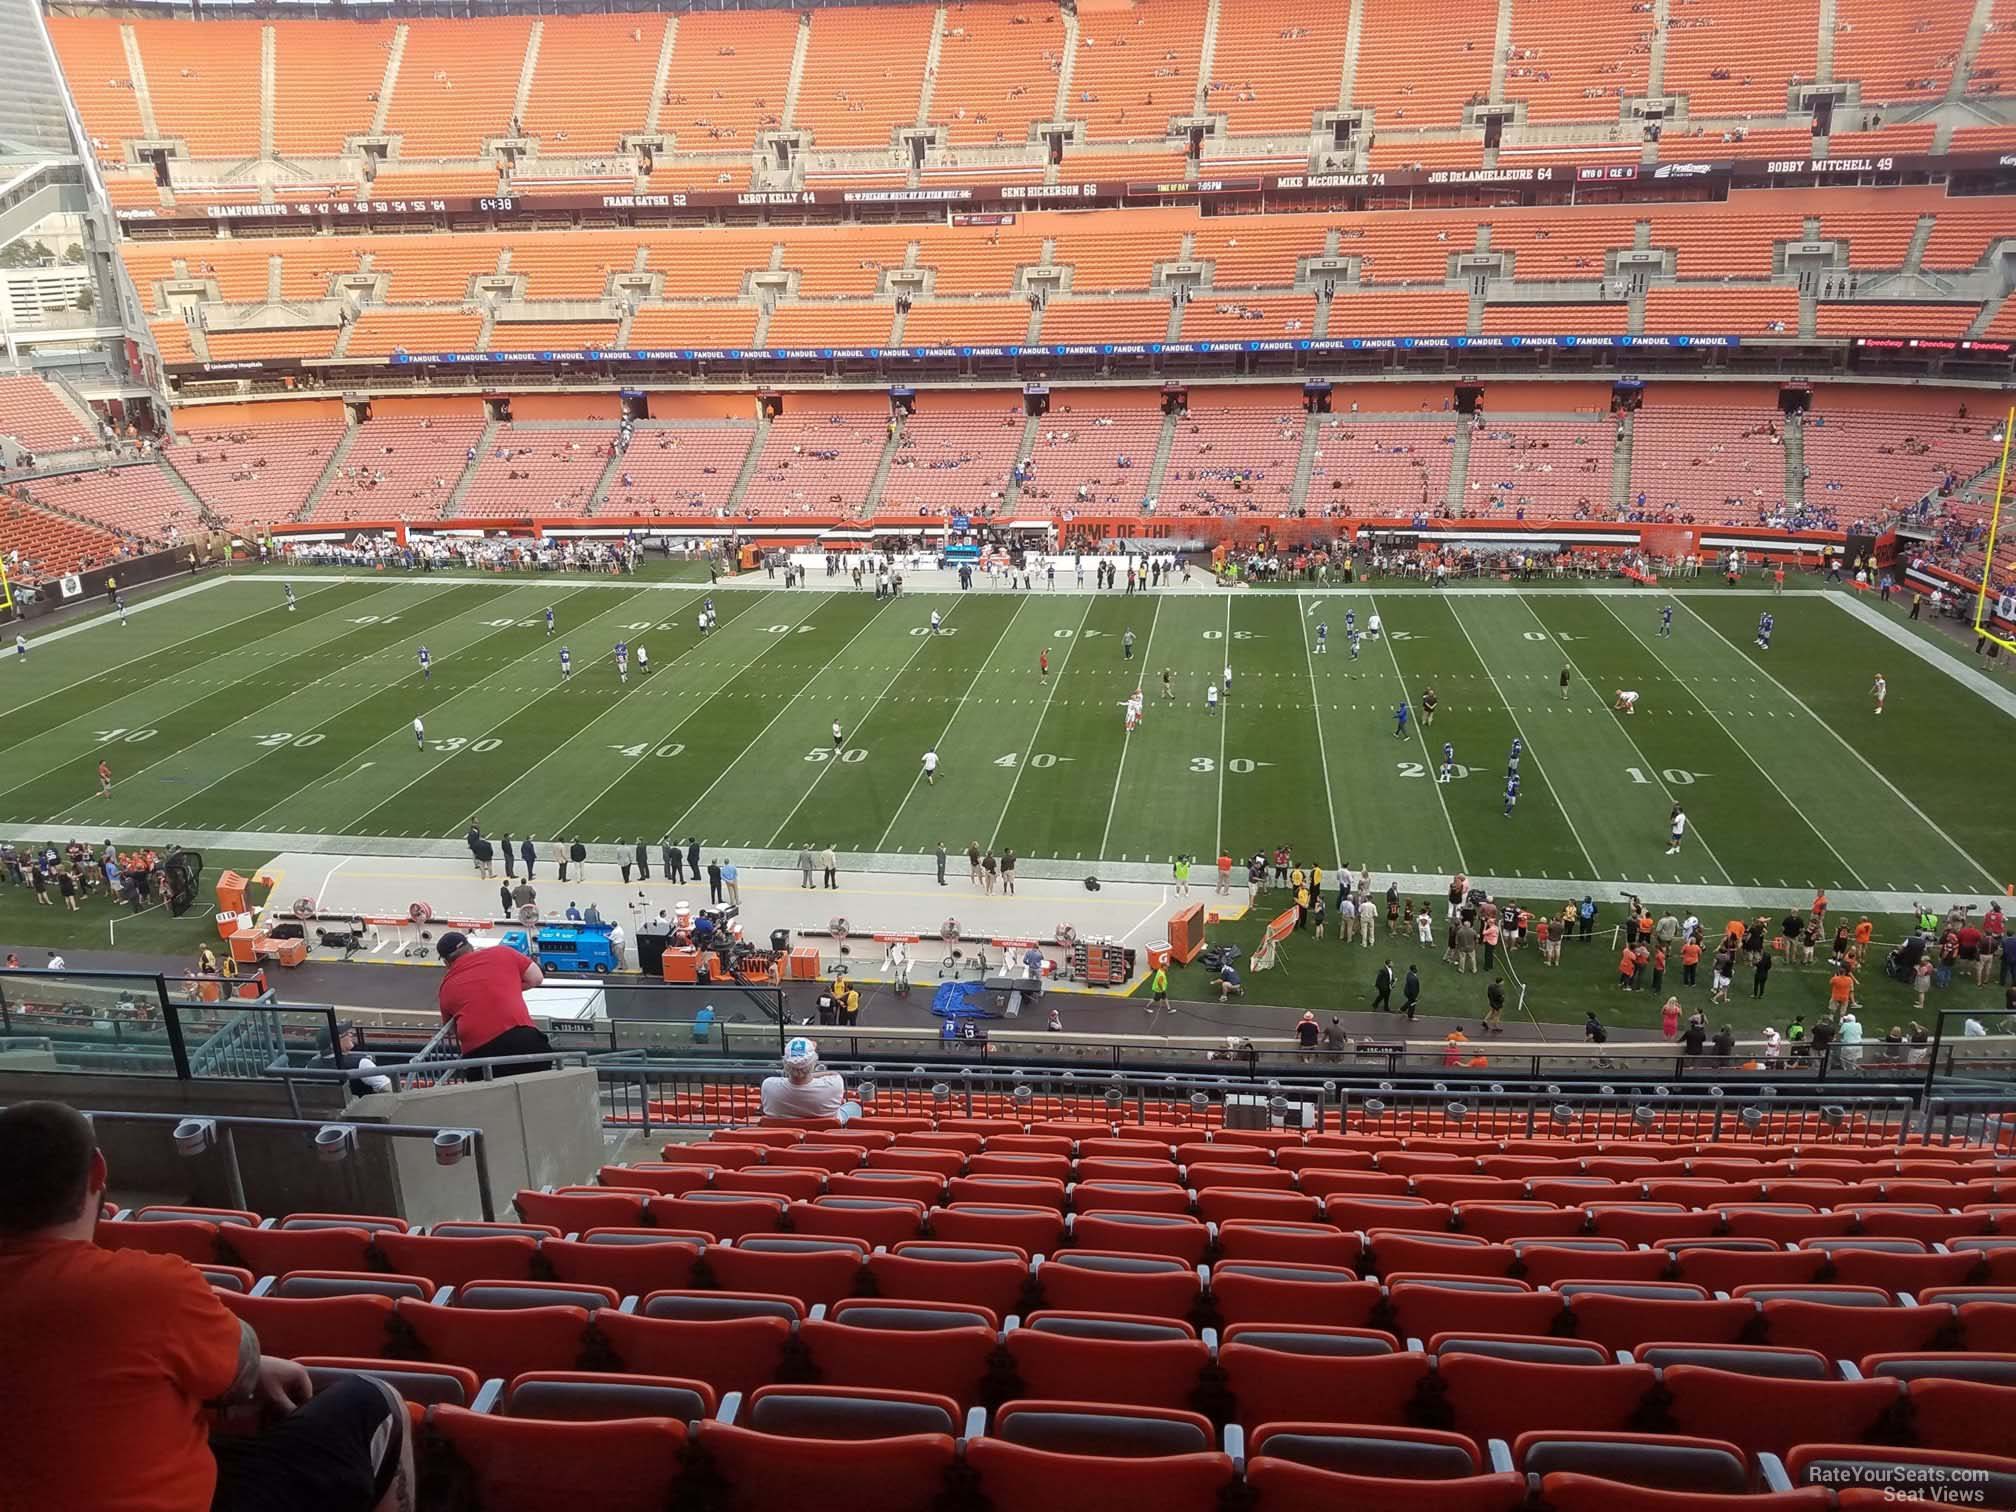 section 335, row 18 seat view  - cleveland browns stadium